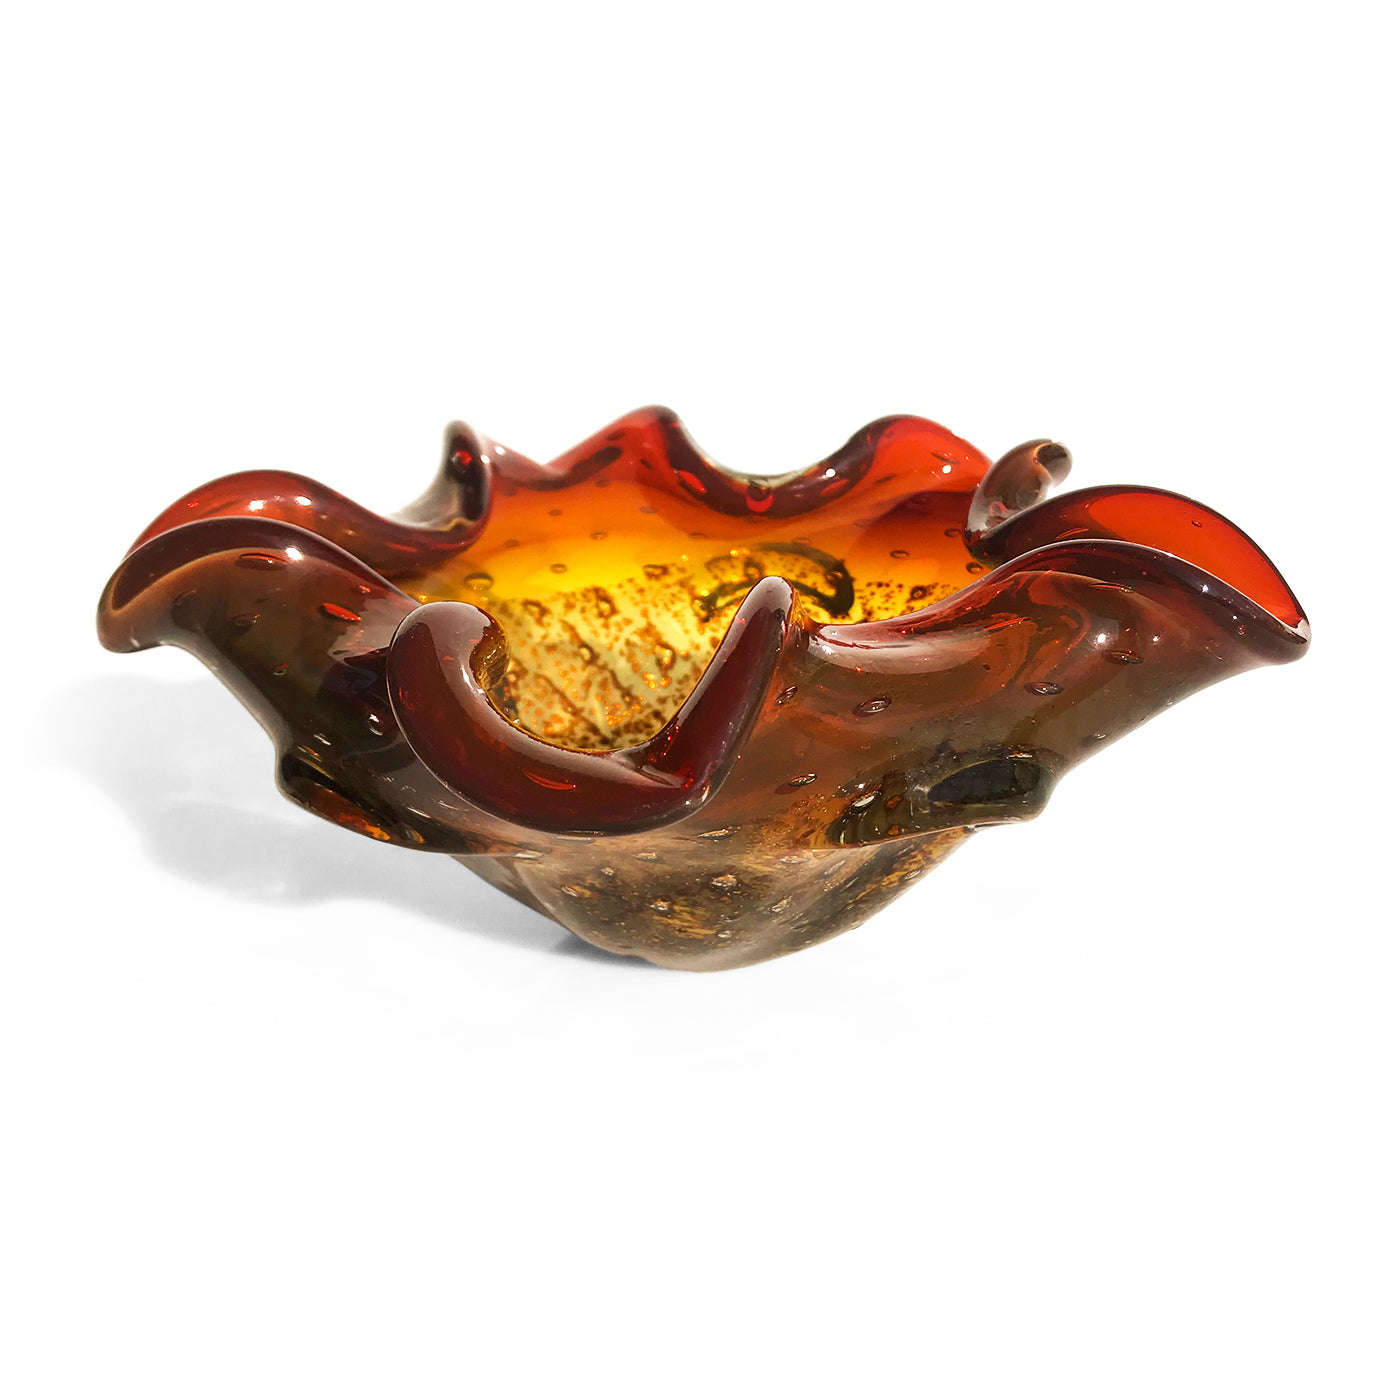 Murano Art Glass bowl, with a fantastic firey mix of colour. Deep oranges, yellows, browns & golden flecks swirl and sparkle in the light making this art bowl a real corker - SHOP NOW - www.intovintage.co.uk